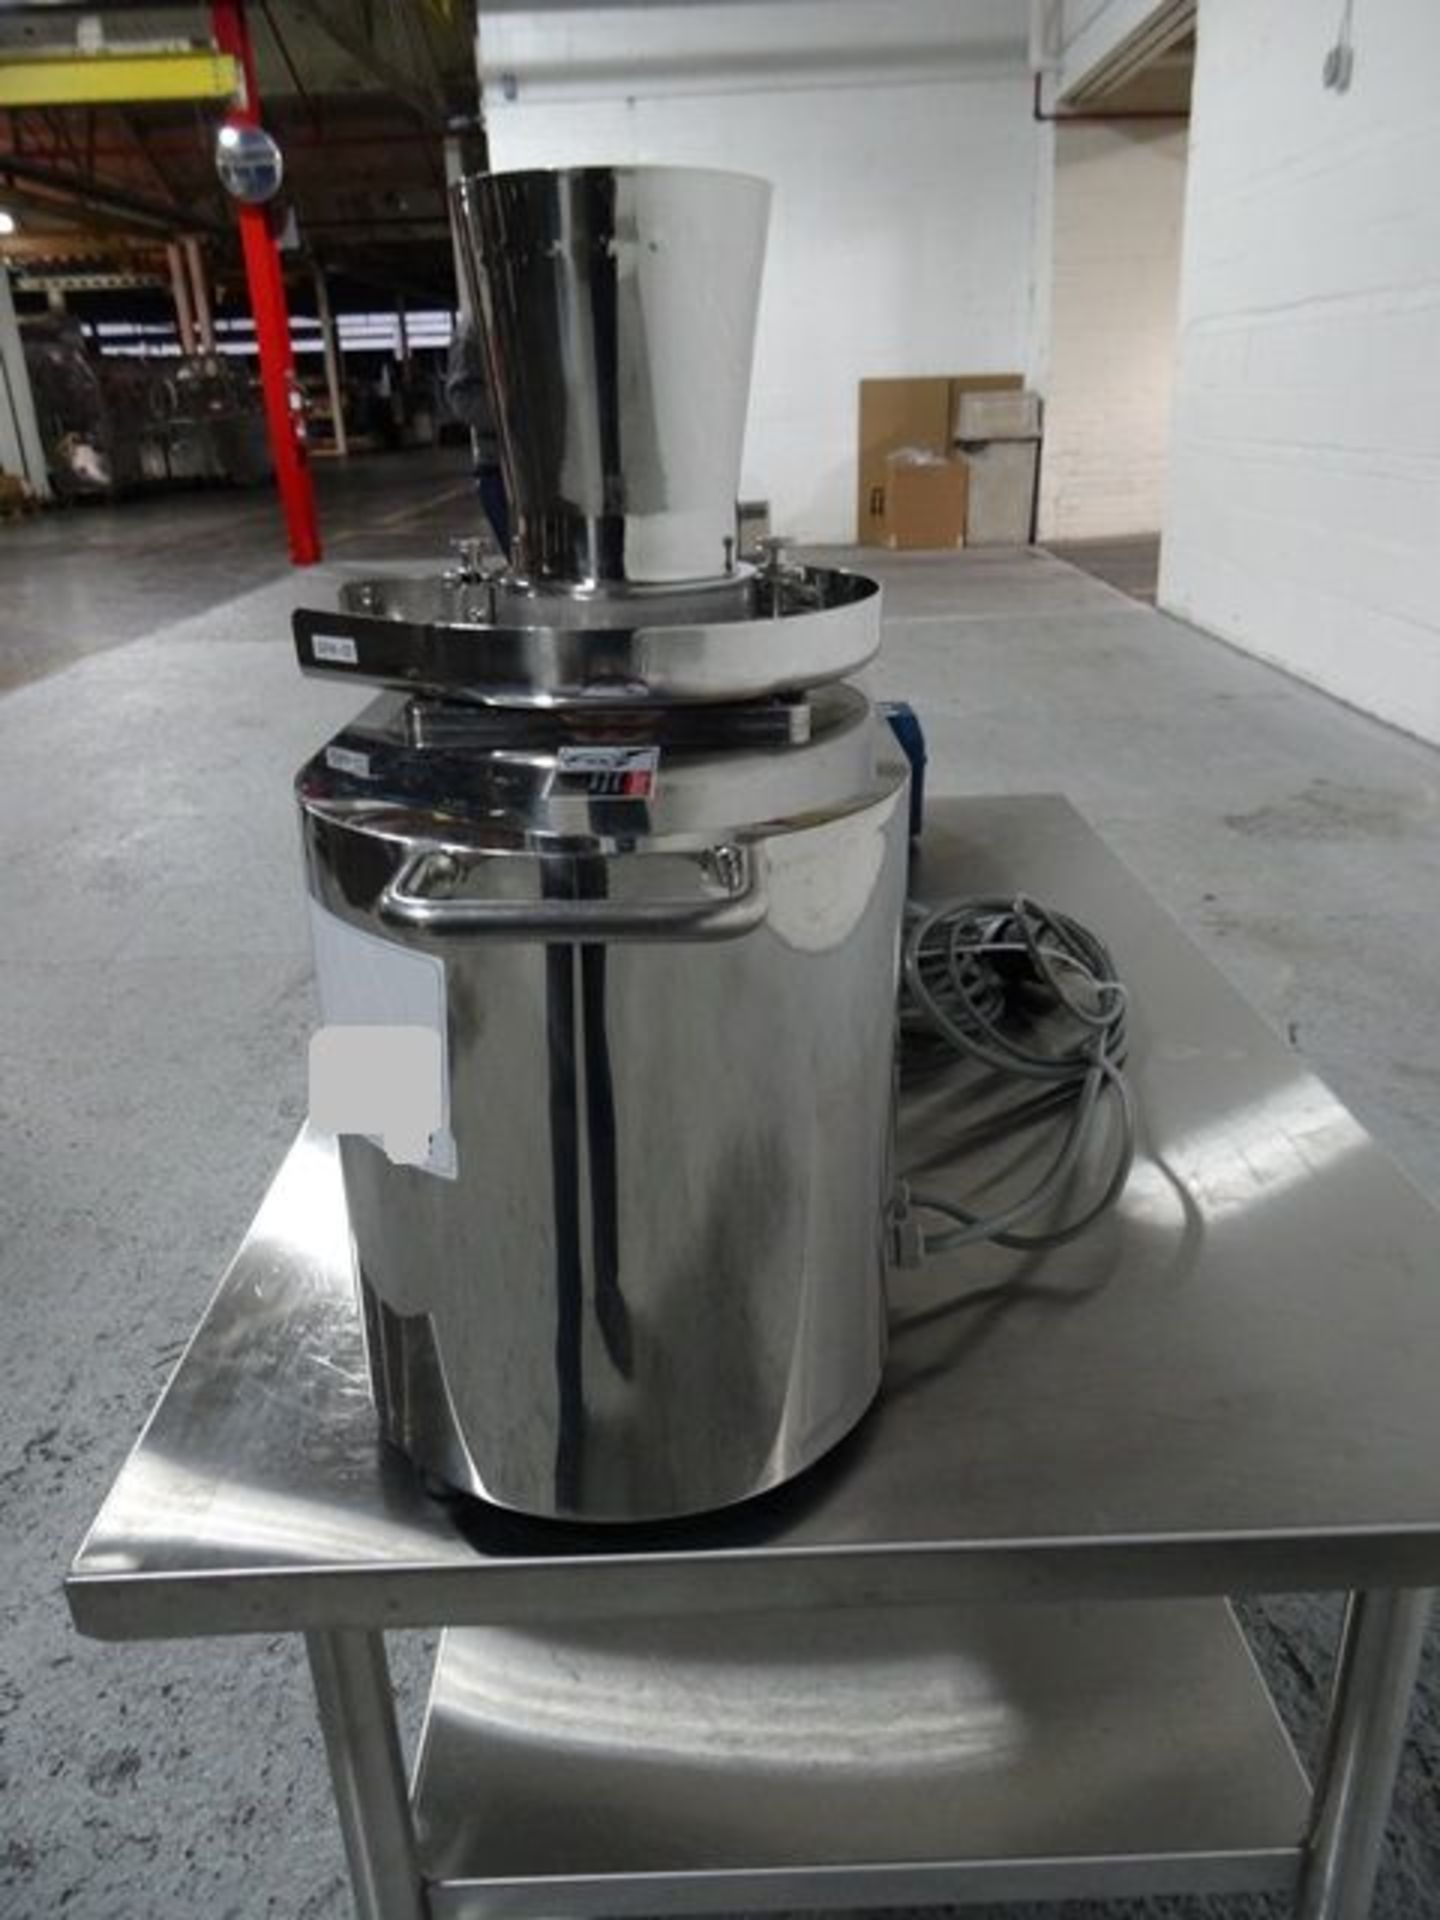 Fuji Paudal LCI Basket Granulator, model BR-150, stainless steel construction, with feed hopper, - Image 6 of 21